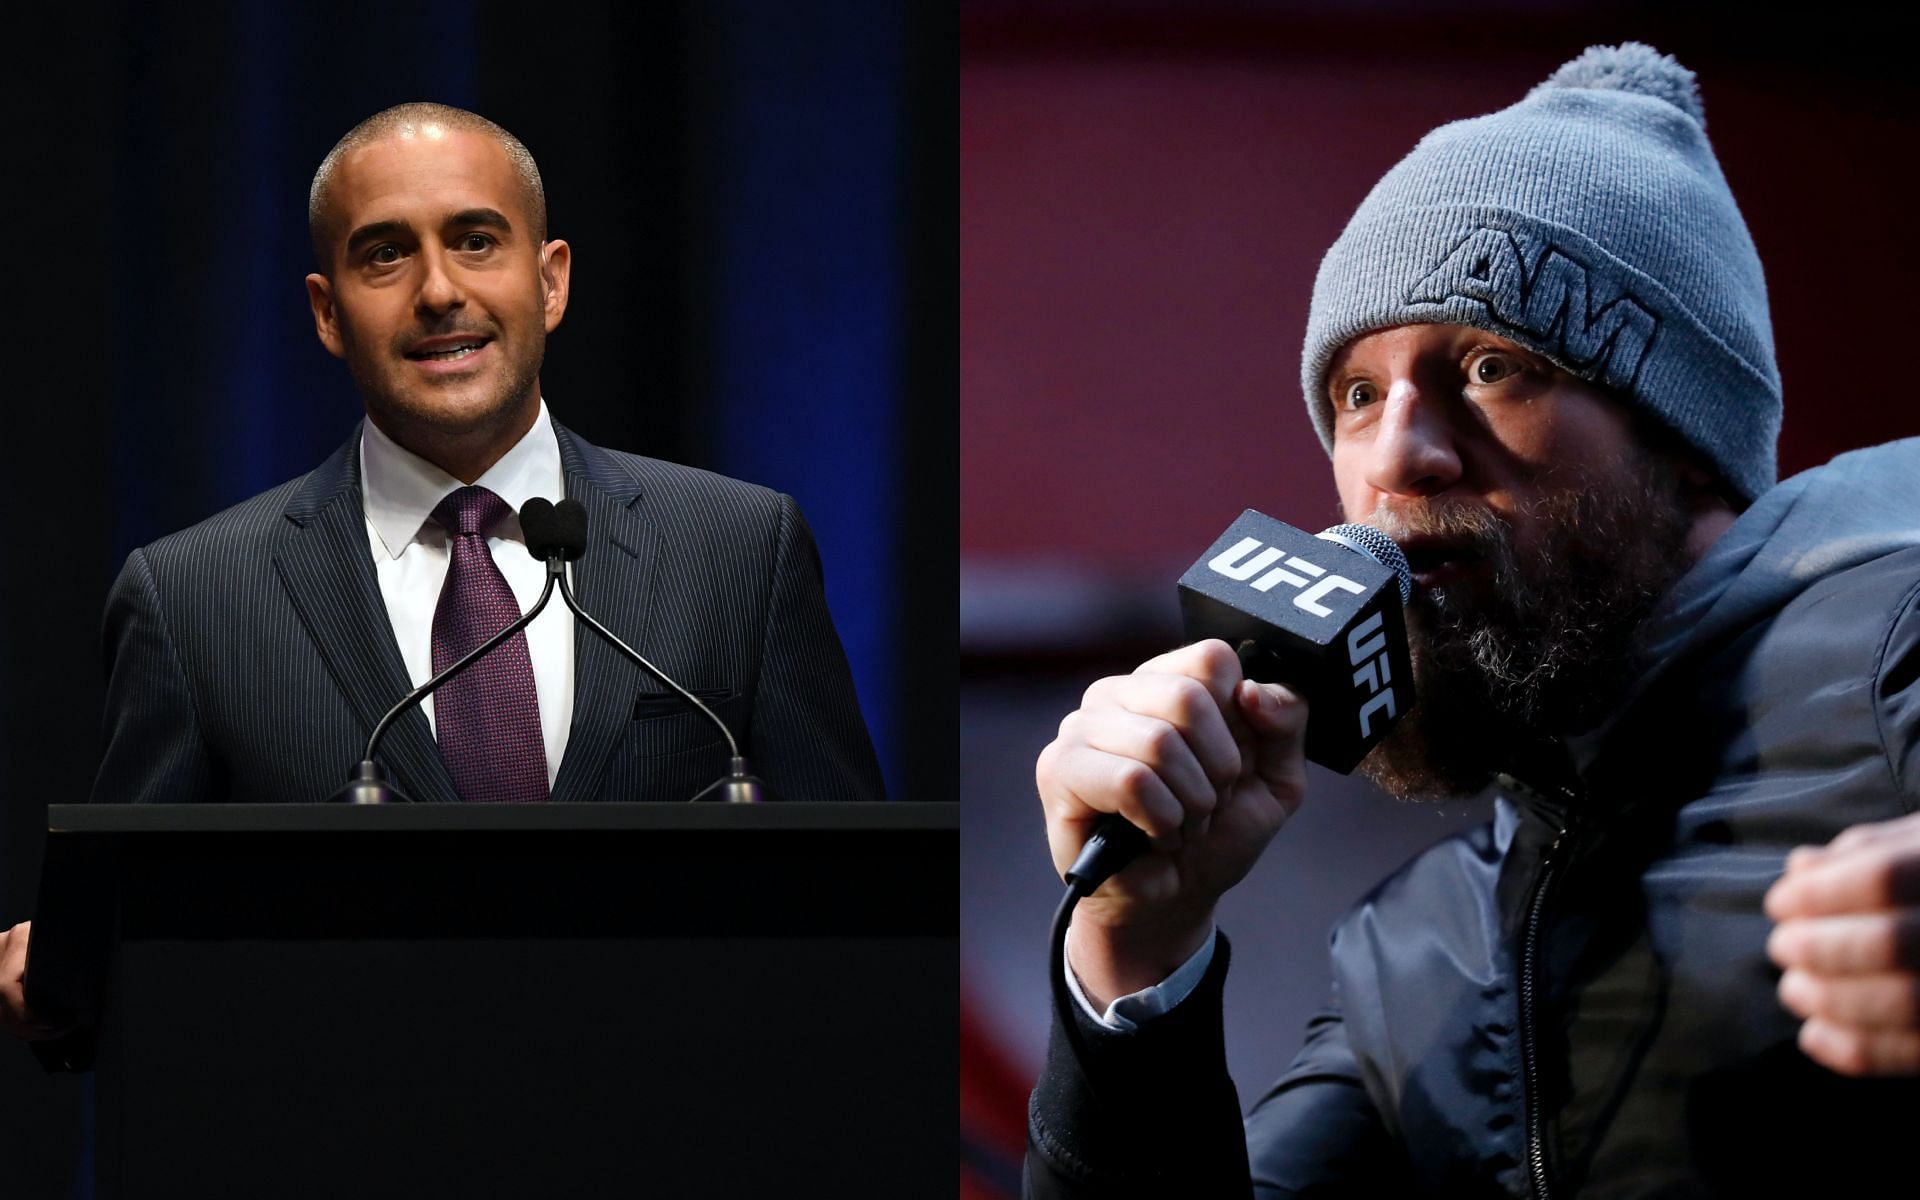 Jon Anik (left) and Conor McGregor (right) [Image credits: Getty Images]